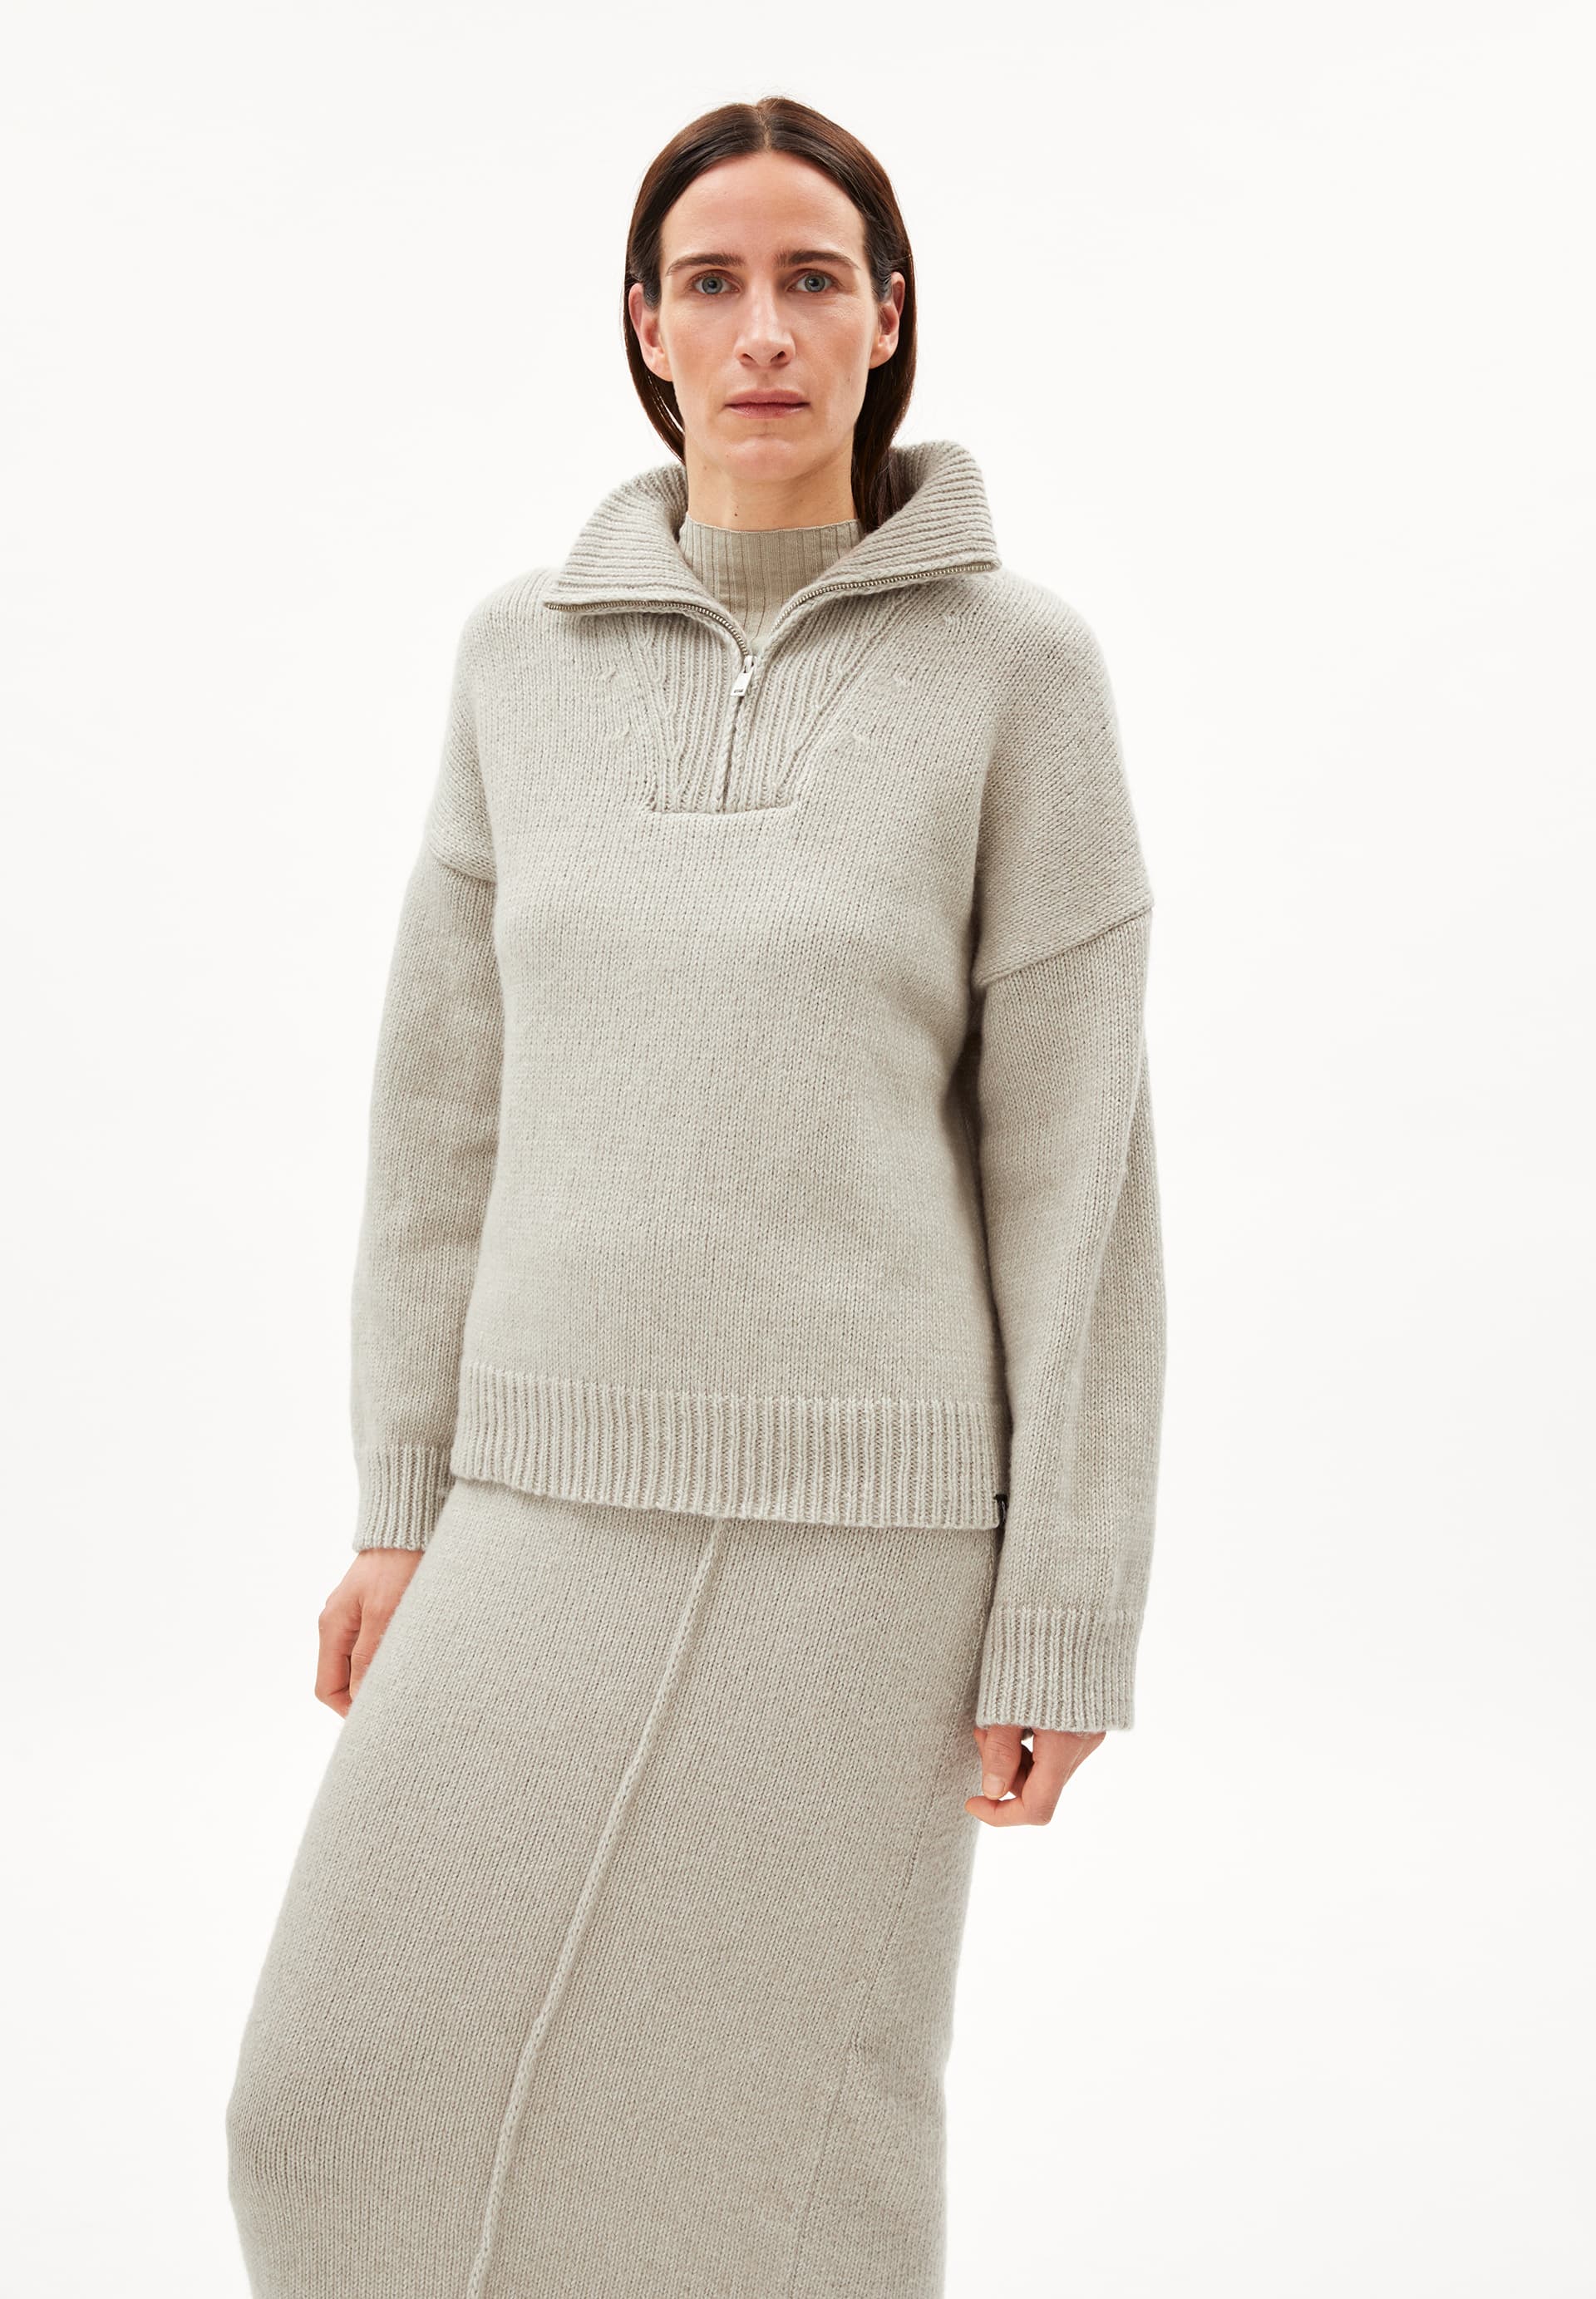 RONYAAS SOFT Sweater Loose Fit made of Organic Cotton Merino Mix